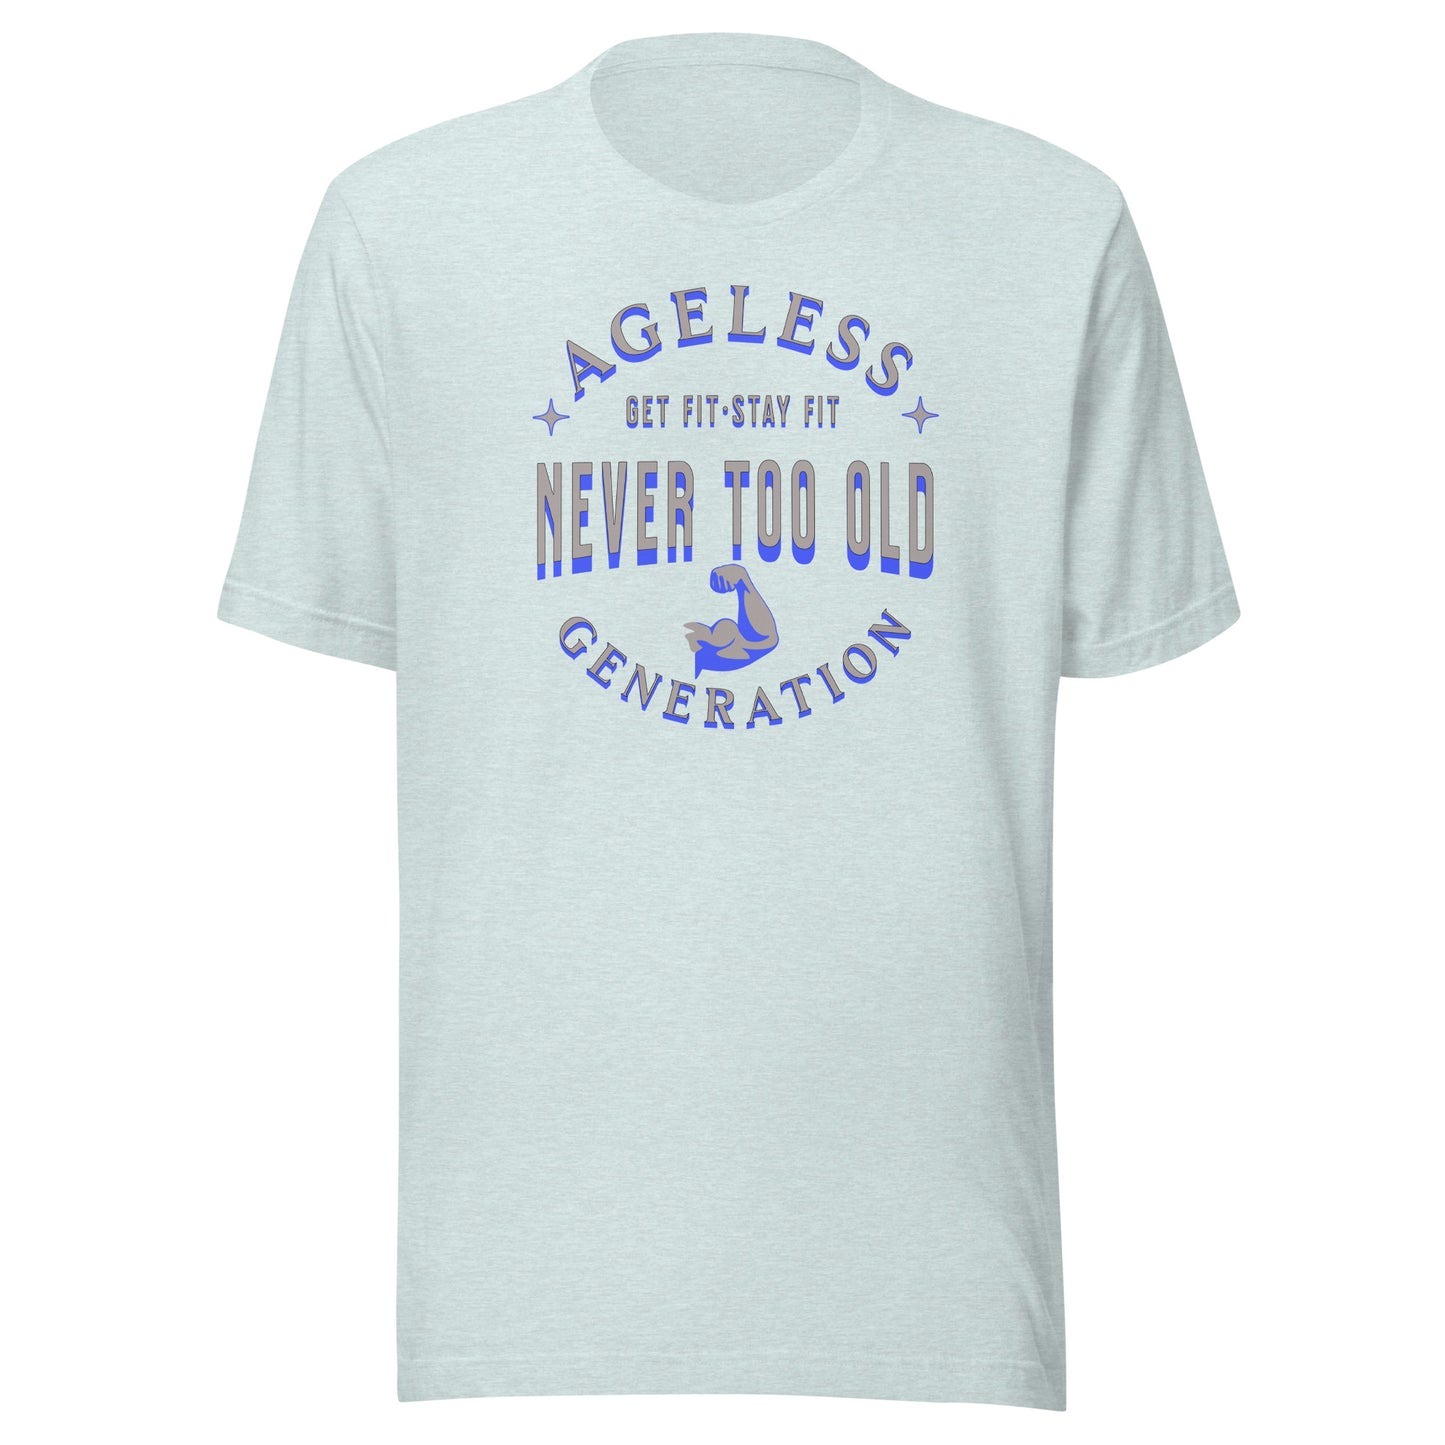 Ageless Generation: Never Too Old Unisex t-shirt